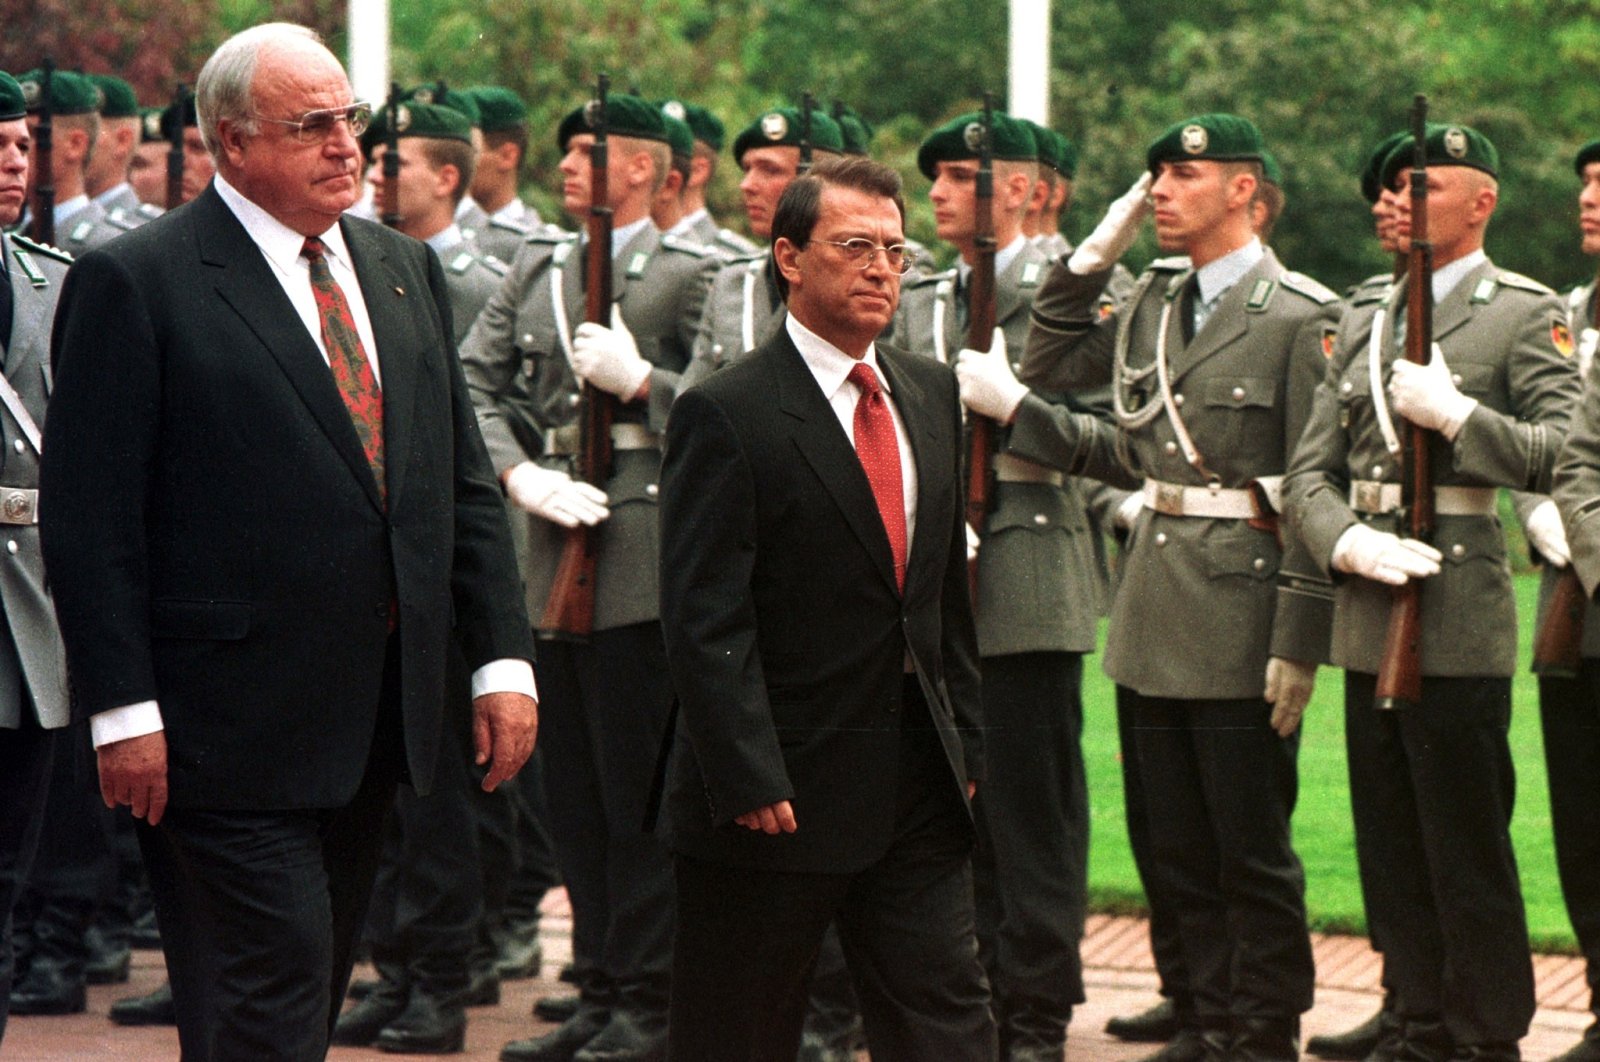 Then-Prime Minister Mesut Yılmaz (R) and German Chancellor Helmut Kohl review an honor guard in the garden of the Chancellery in Bonn, Germany, Sept. 30, 1997. (Reuters File Photo)